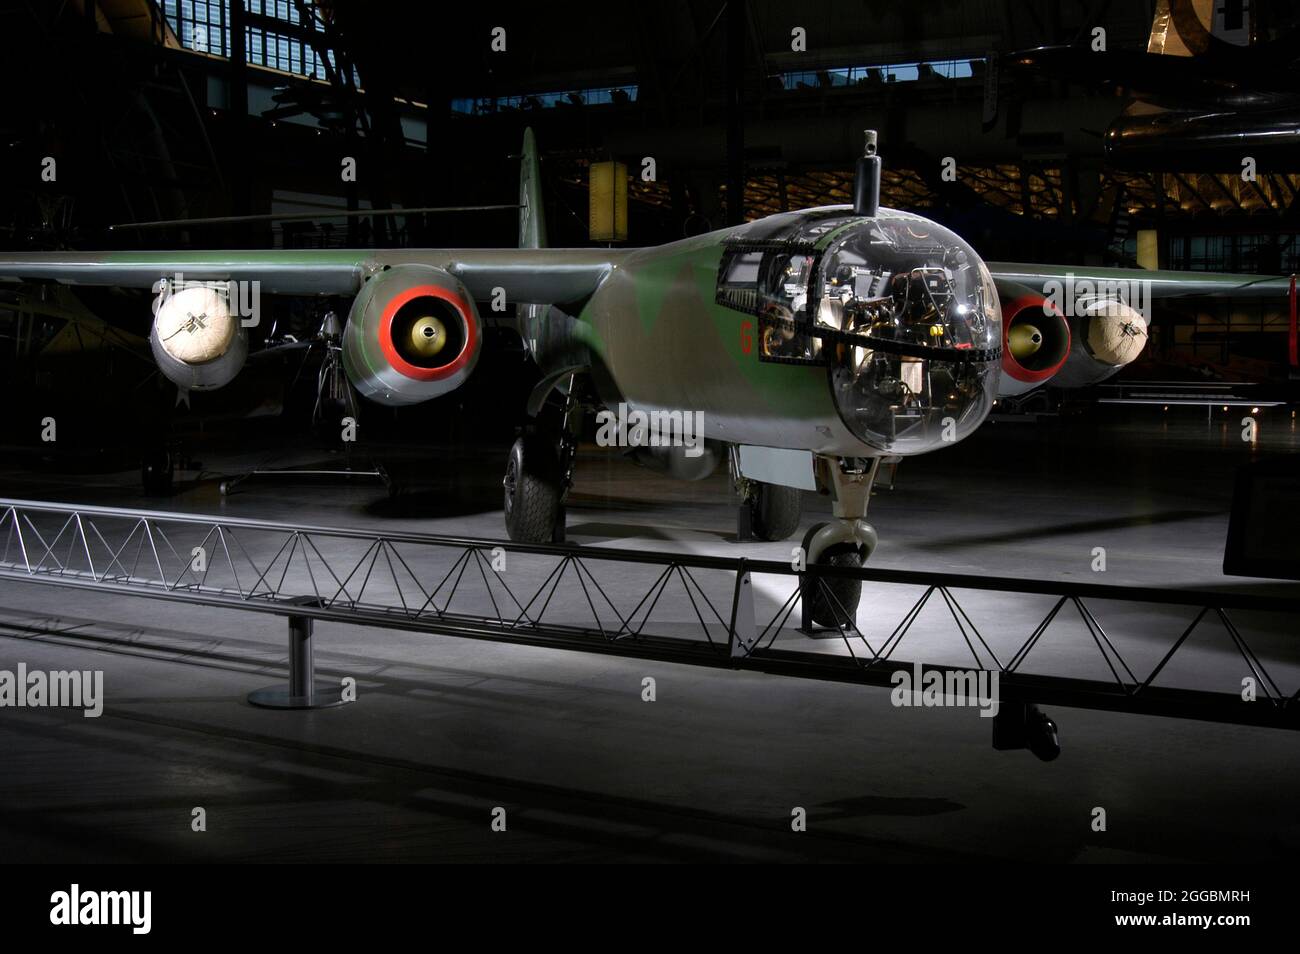 Single seat, twin engine jet bomber with RATO. The Arado Ar 234 B Blitz (Lightning) was the world's first operational jet bomber and reconnaissance aircraft. The first Ar 234 combat mission, a reconnaissance flight over the Allied beachhead in Normandy, took place August 2, 1944. With a maximum speed of 735 kilometers (459 miles) per hour, the Blitz easily eluded Allied piston-engine fighters. While less famous than the Messerschmitt Me 262 jet fighters, the Ar 234s that reached Luftwaffe units provided excellent service, especially as reconnaissance aircraft. This Ar 234 B-2 served with bombe Stock Photo